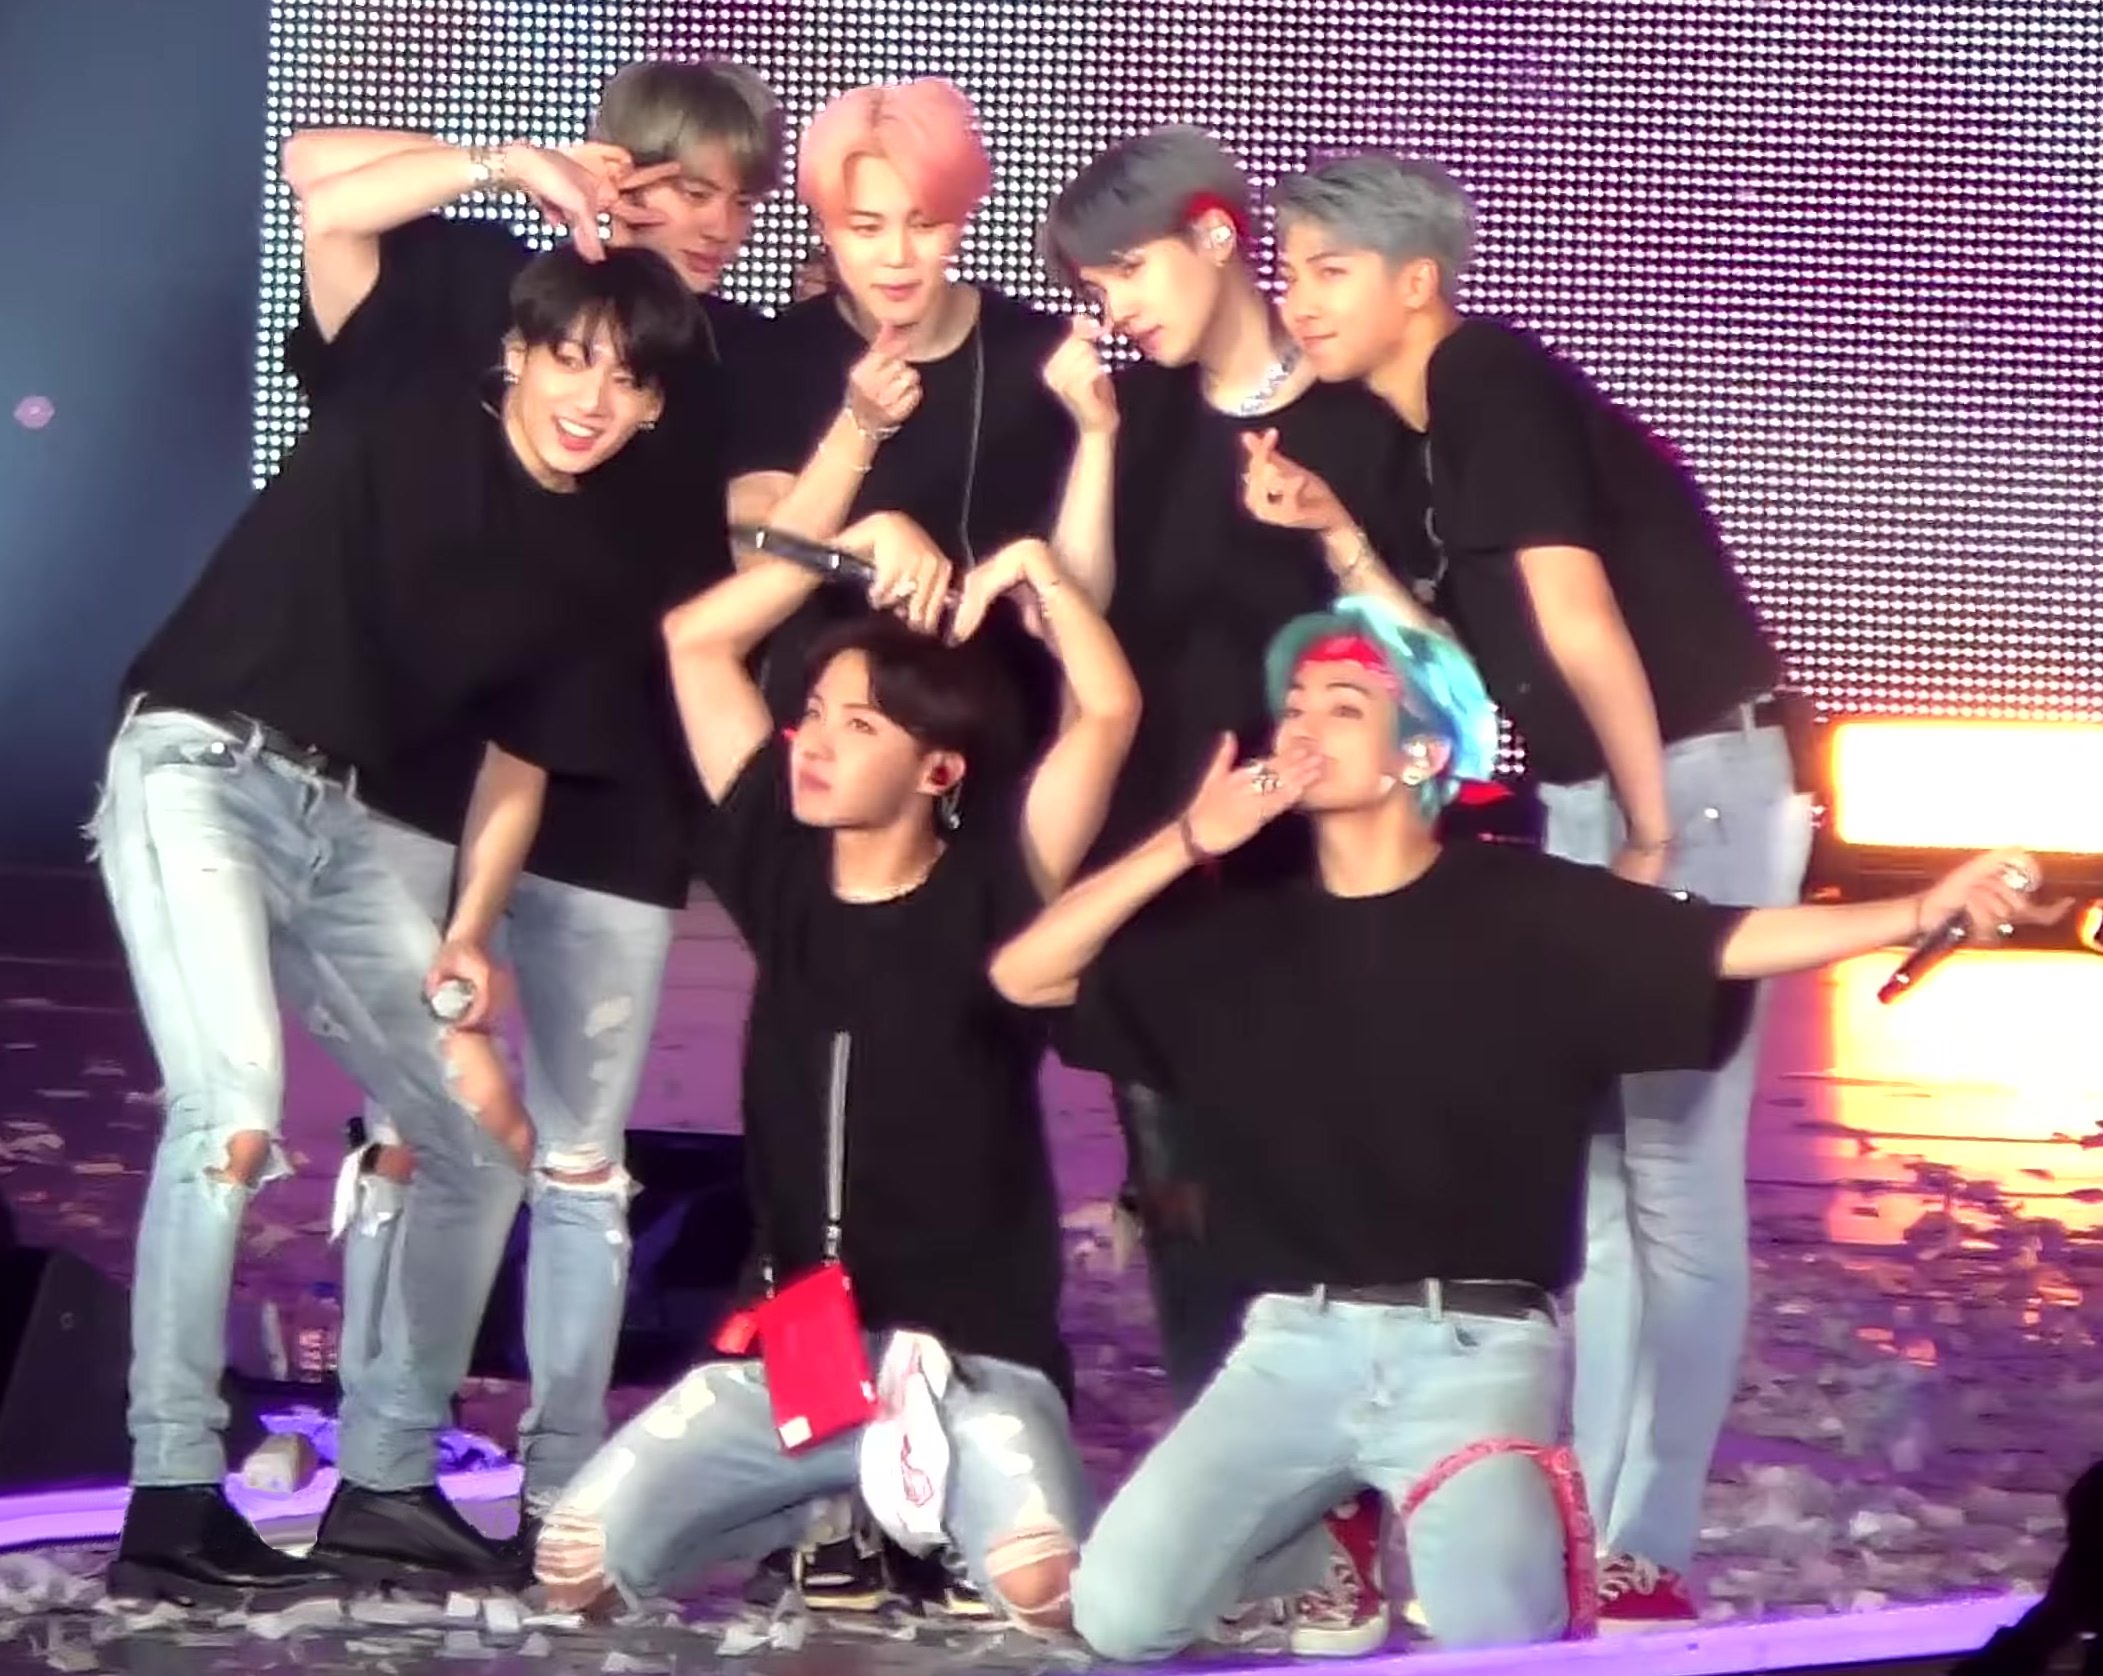 BTS embarked on their "Love Yourself" world tour in 2018, performing in sold-out stadiums and arenas across the globe. The tour showcased their immense talent, captivating performances, and deep connection with their fans, known as ARMY.]]>